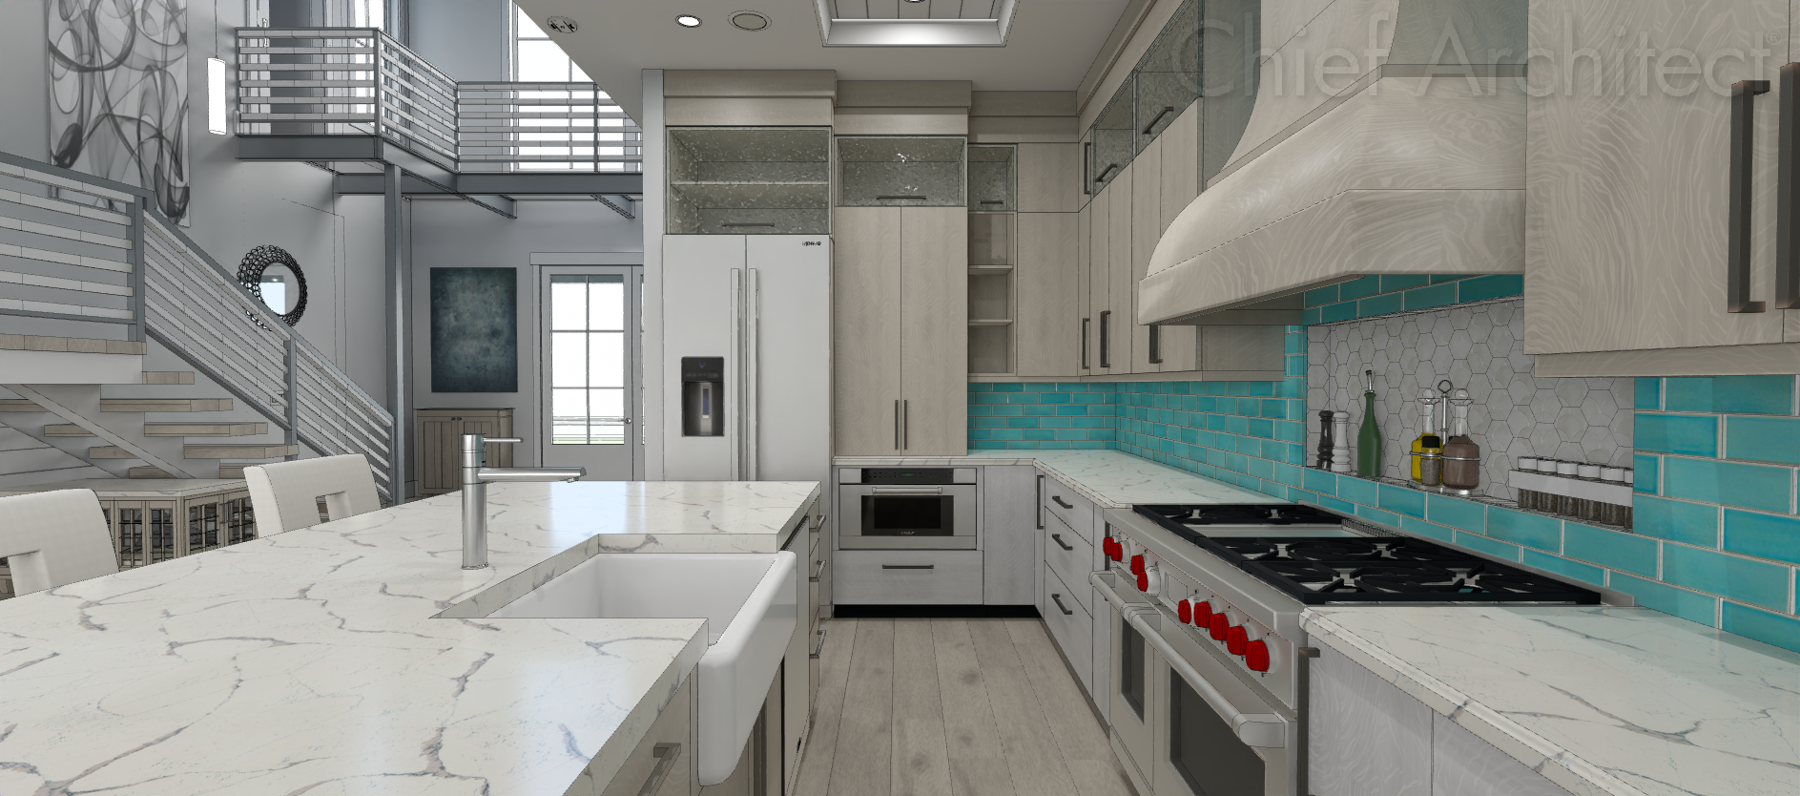 A kitchen designed in Chief Architect with appliance and material selection package number 3 chosen.